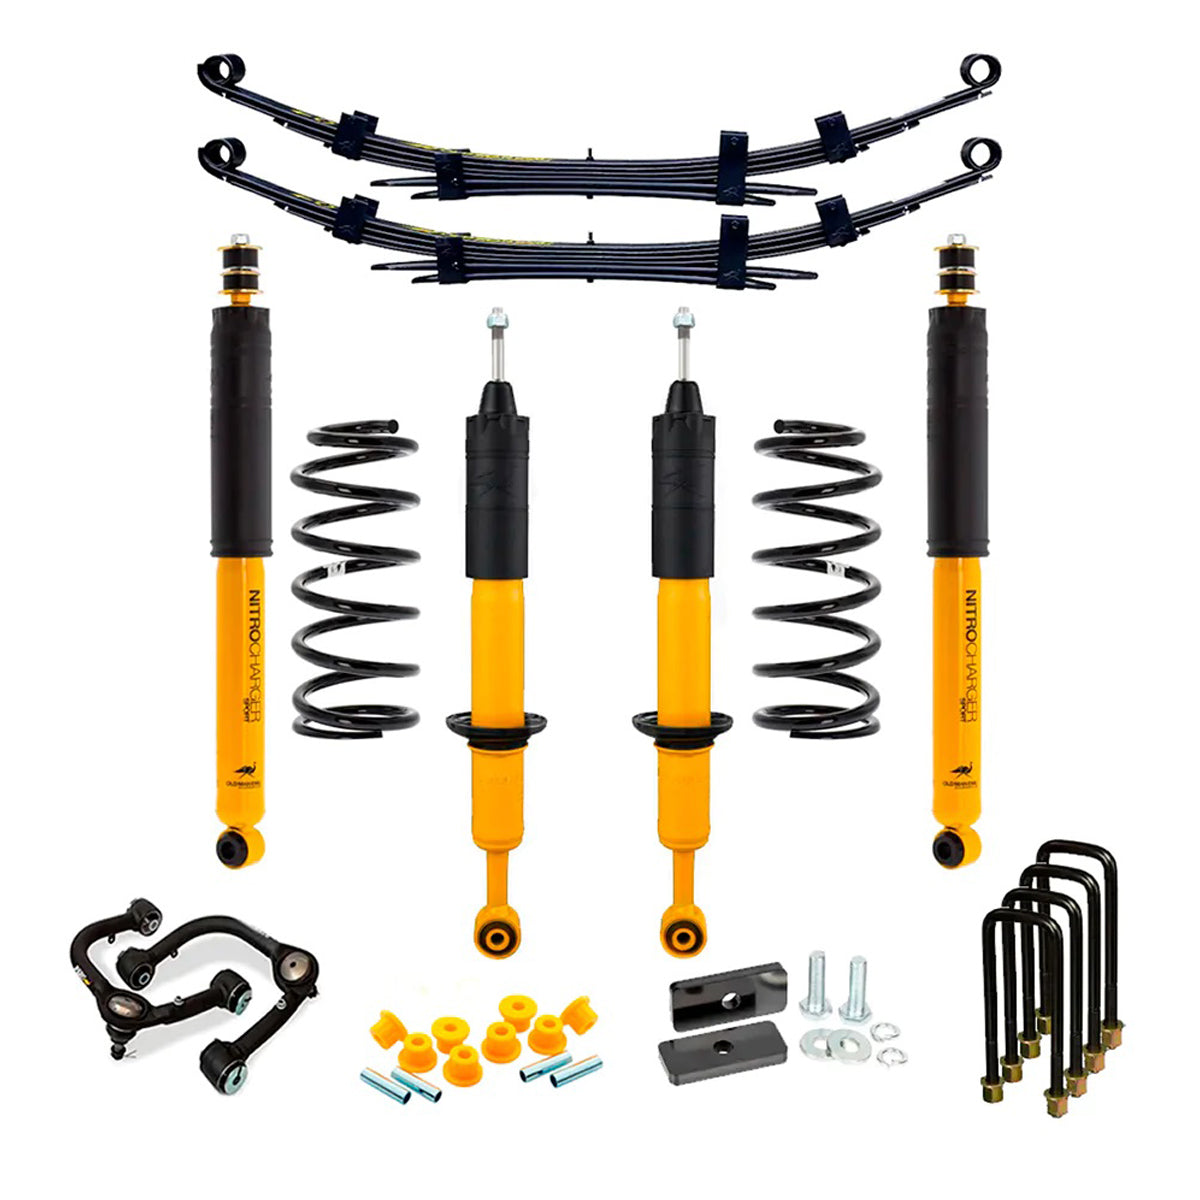 OME 3 inch Lift Kit for Tacoma (05-15)